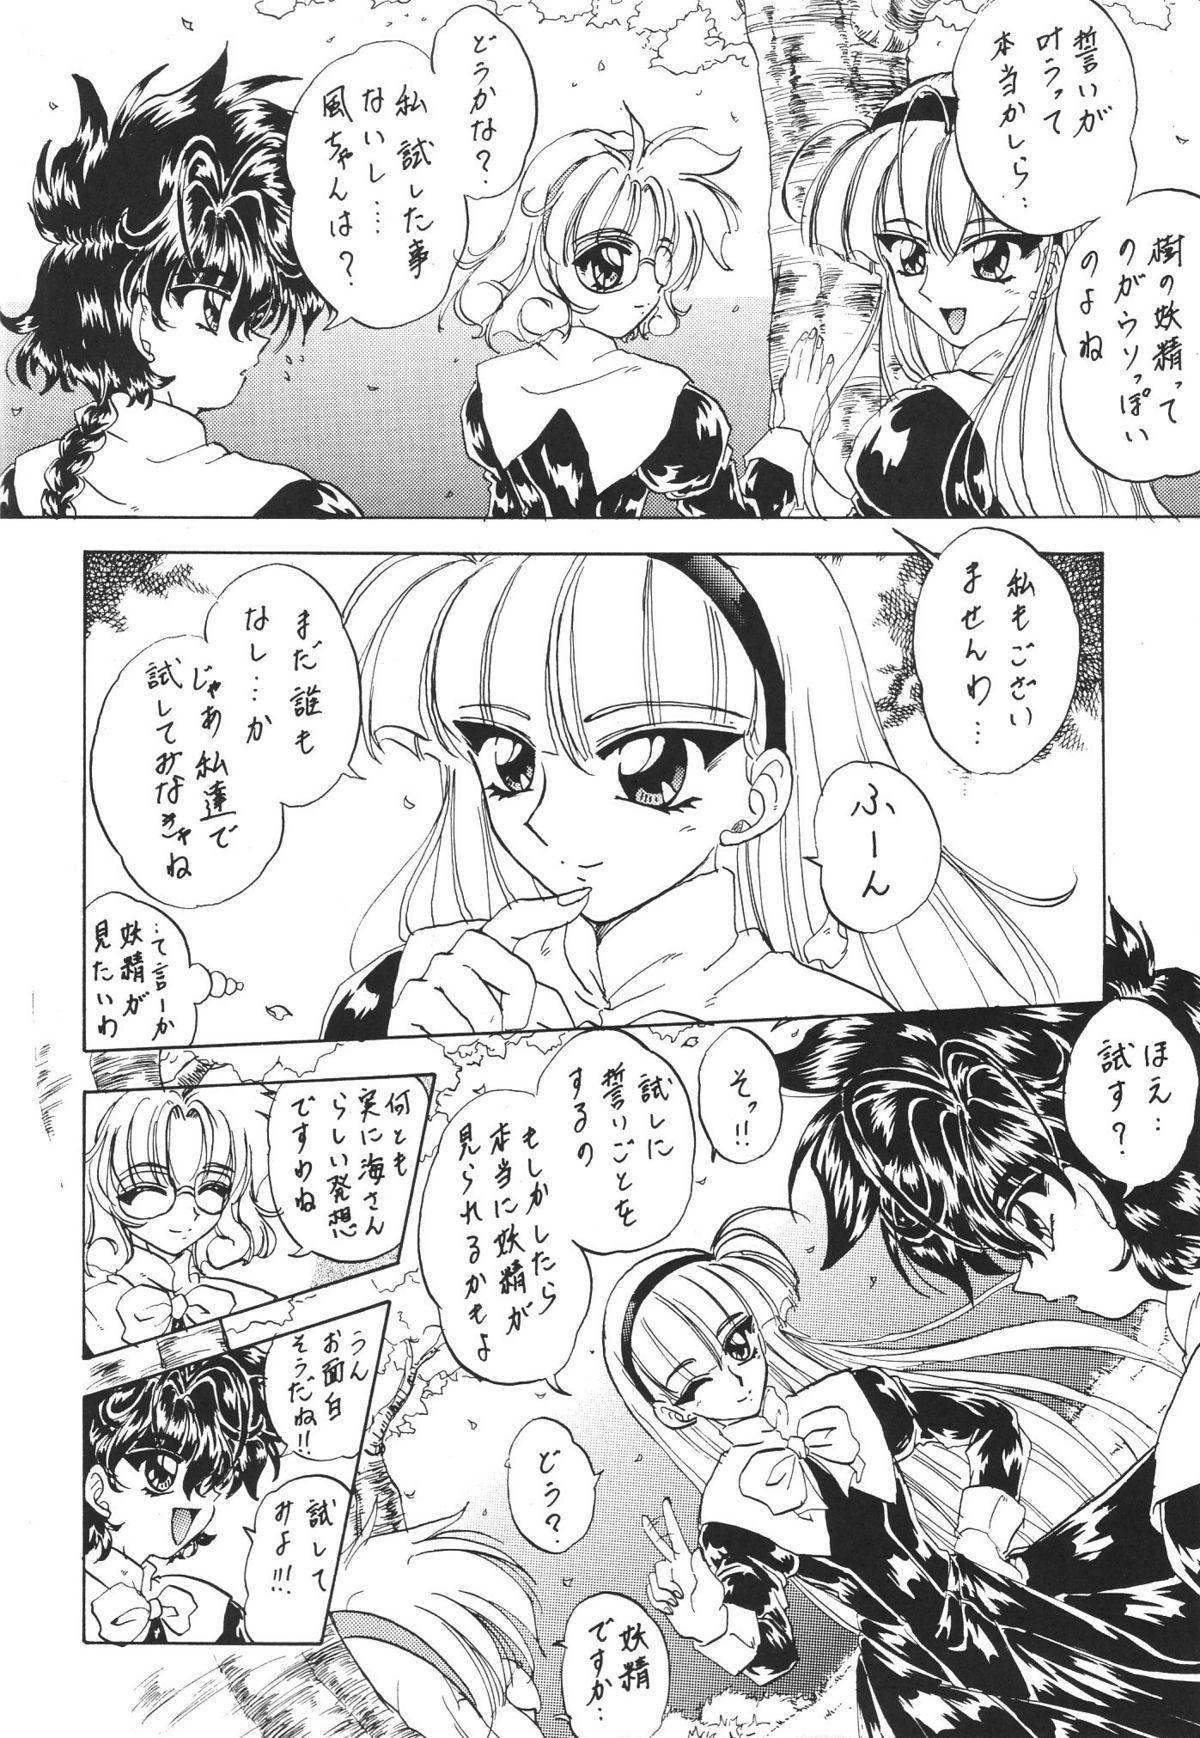 Porn Star Stale World V - Magic knight rayearth Naked - Page 7